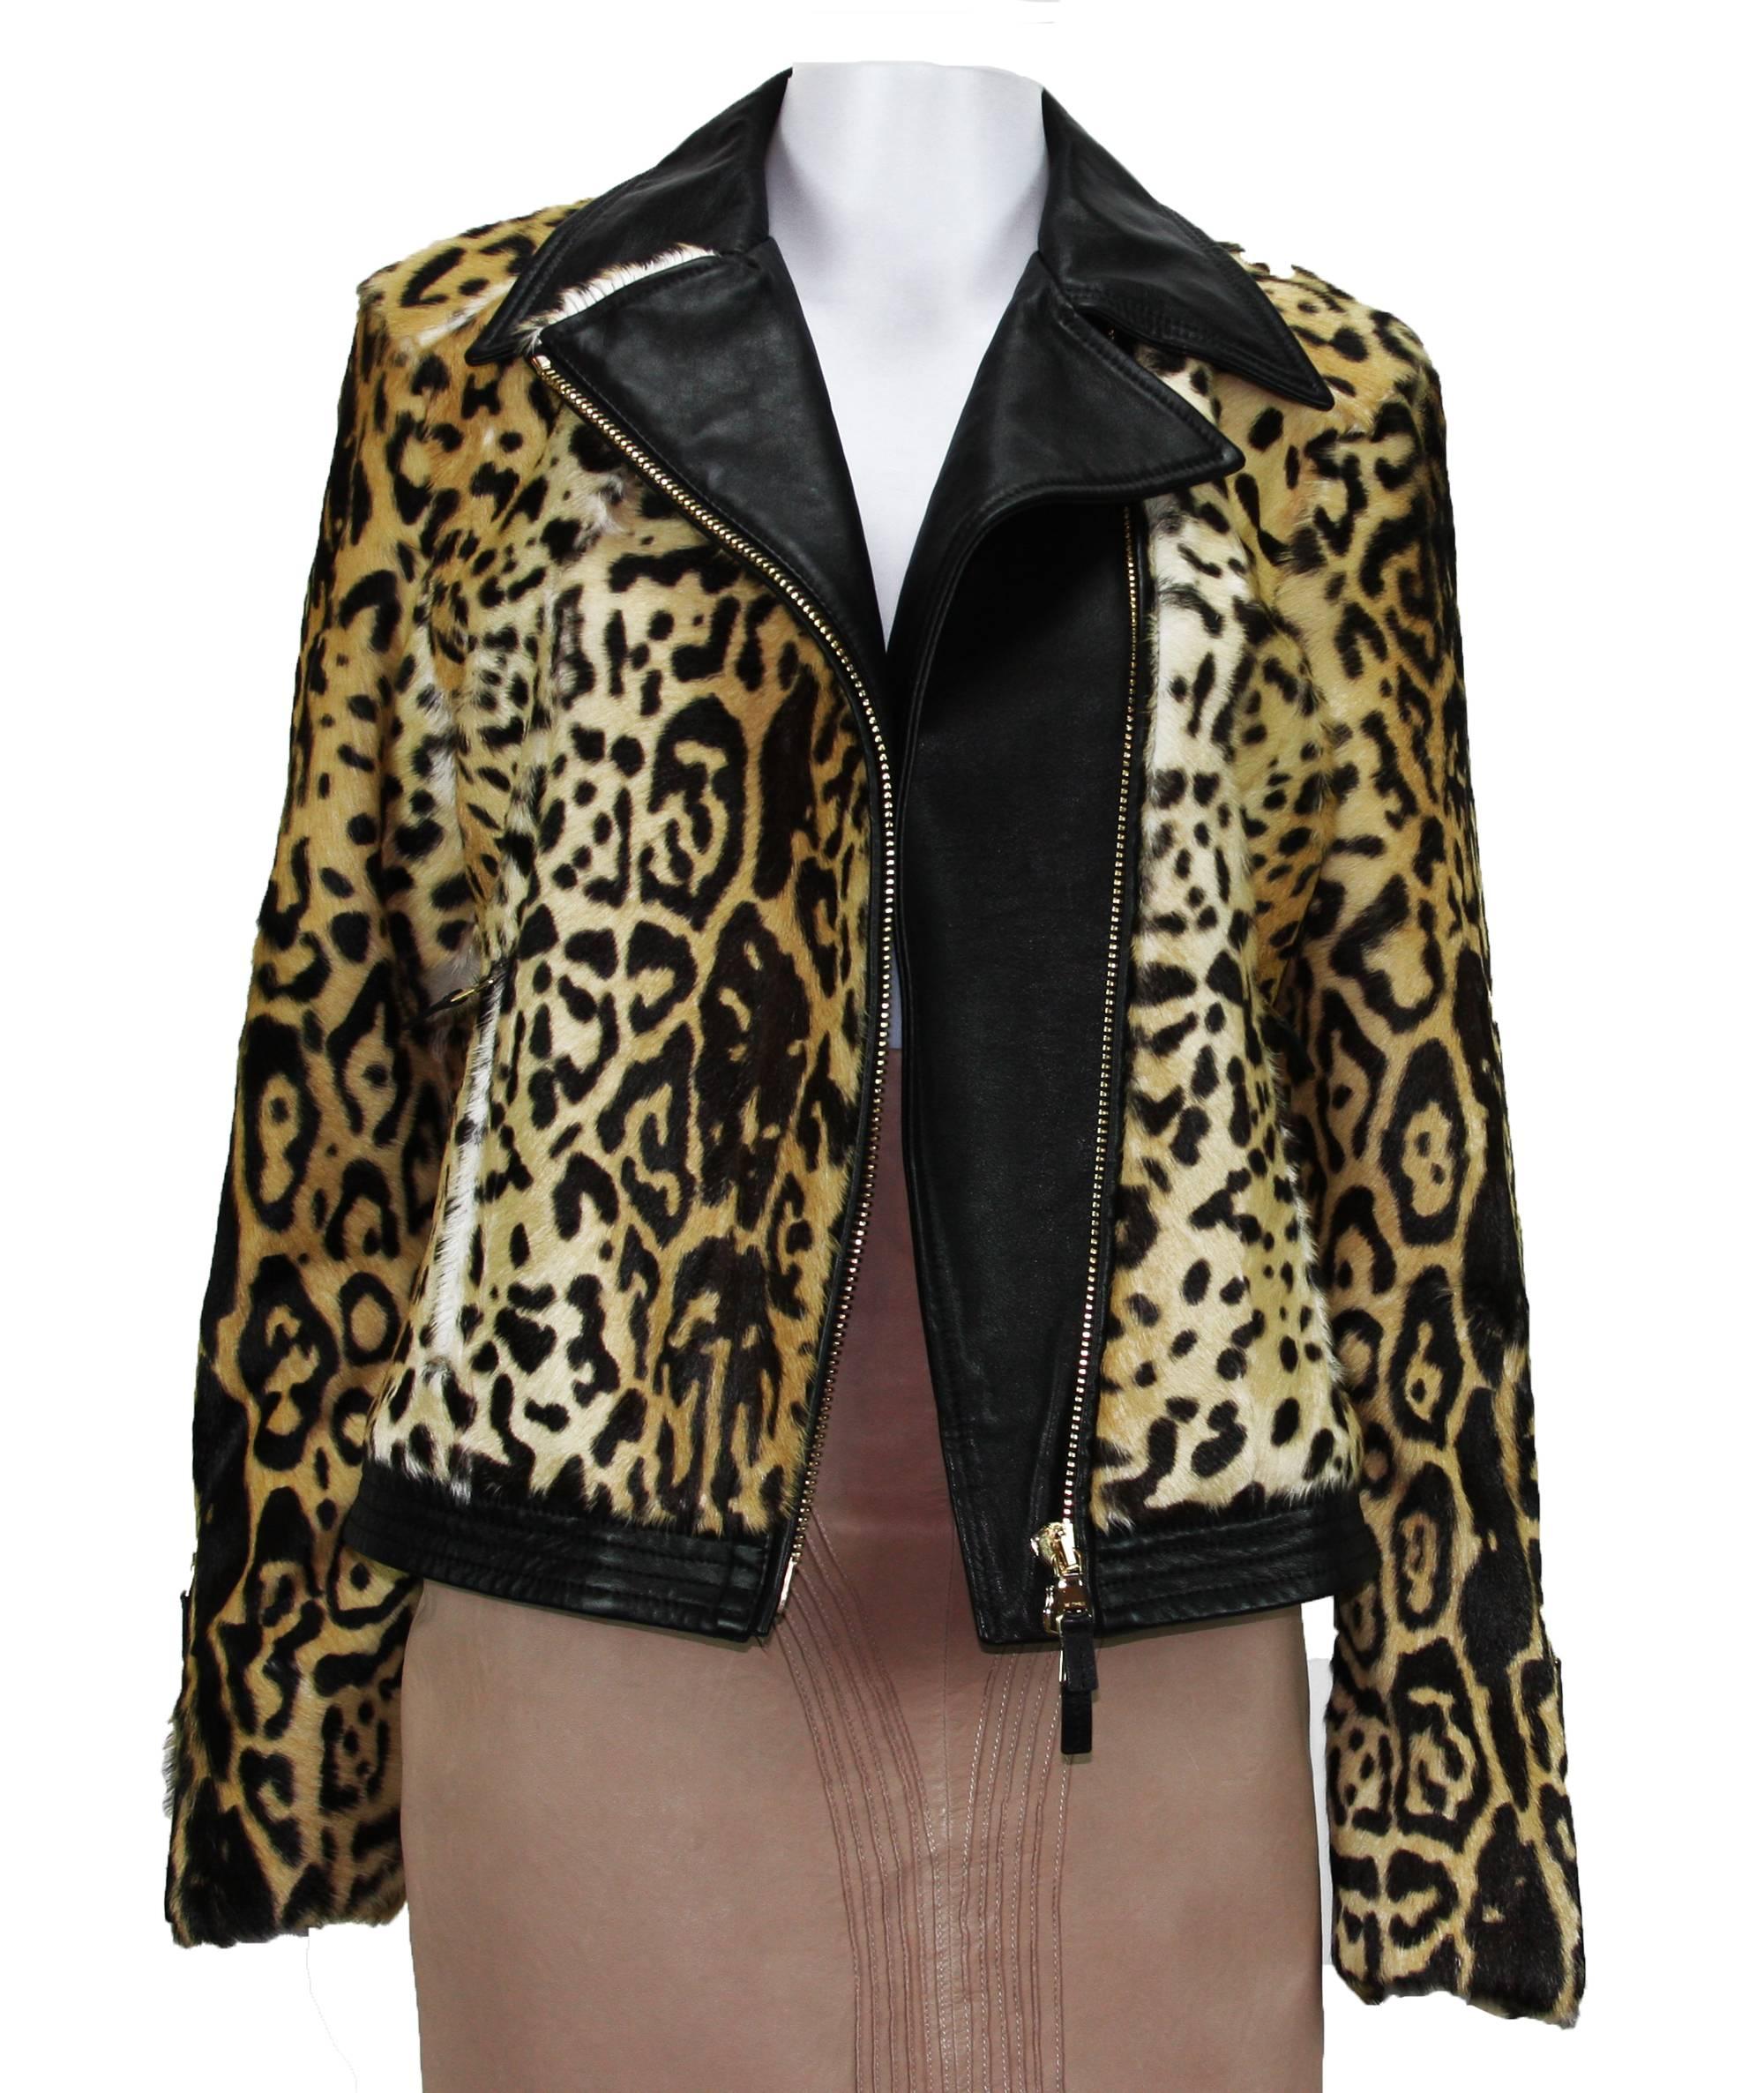 New Etro Leopard Printed Moto Jacket

100% lamb

Colors - Black & Yellow

Two Front Zip Closure Pockets

Gusseted Zip Cuffs

Fully Lined & Padded

Italian Sizes: 42 and 44 available

Tags attached.